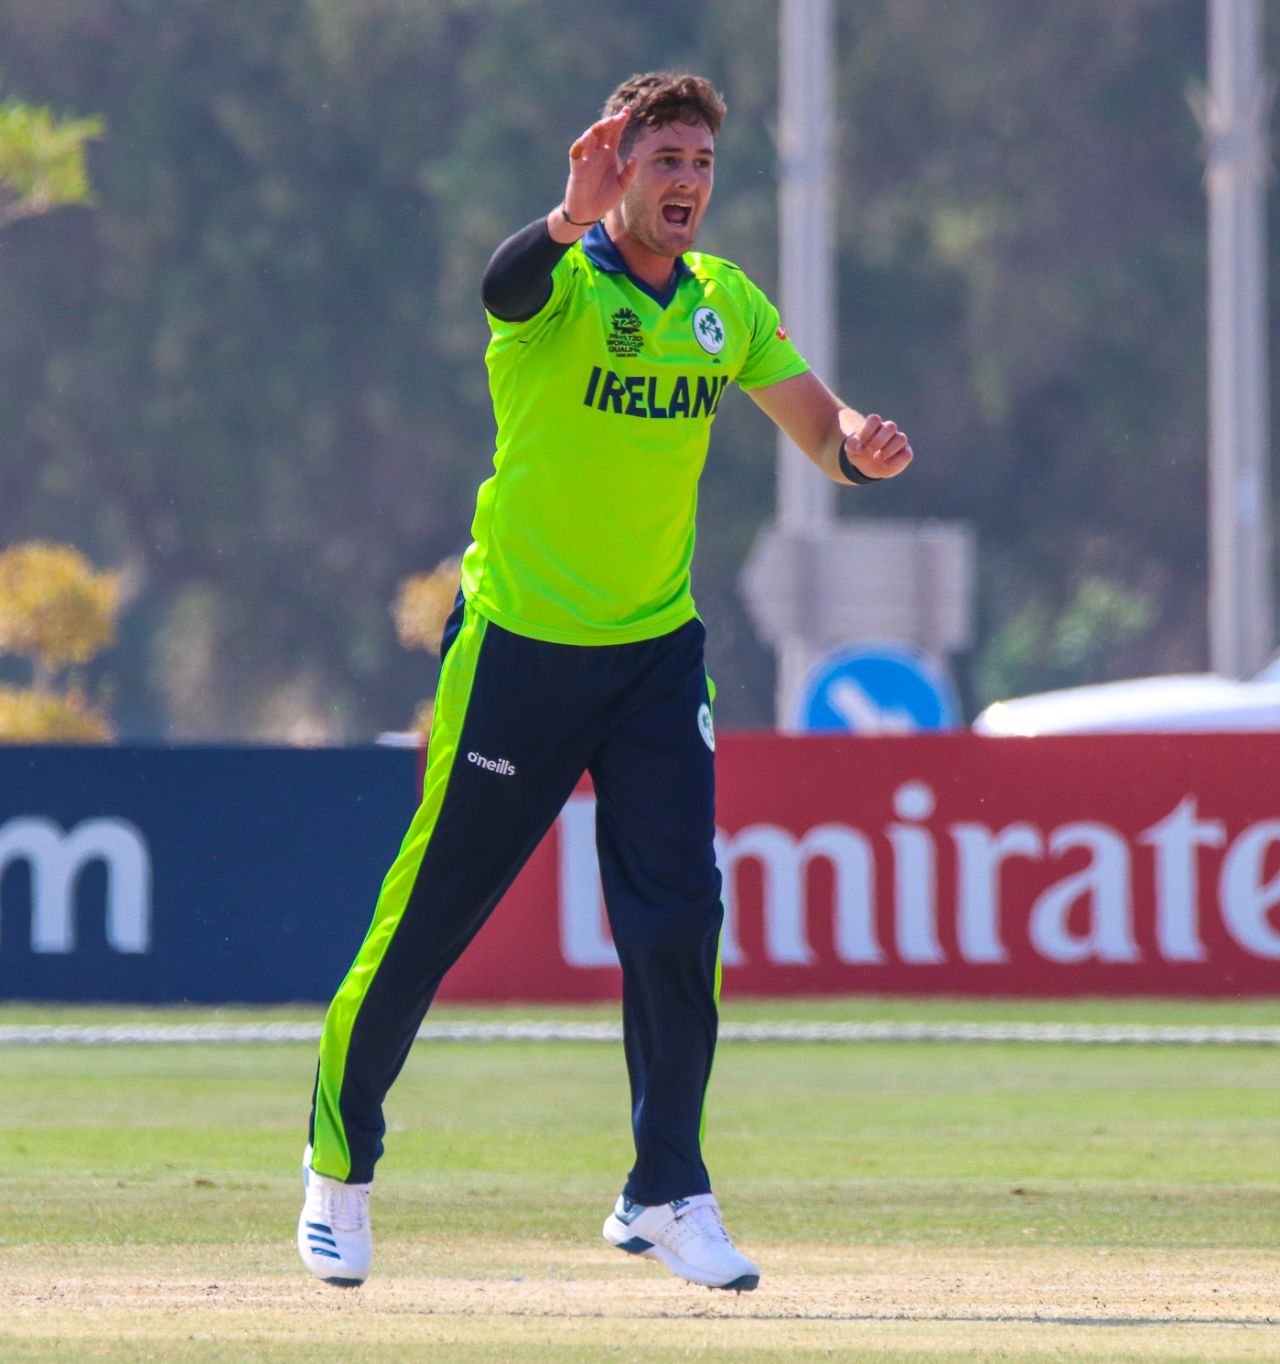 Mark Adair celebrates an edge to the keeper for another wicket, Ireland v Jersey, ICC Men's T20 World Cup Qualifier, Abu Dhabi, October 25, 2019